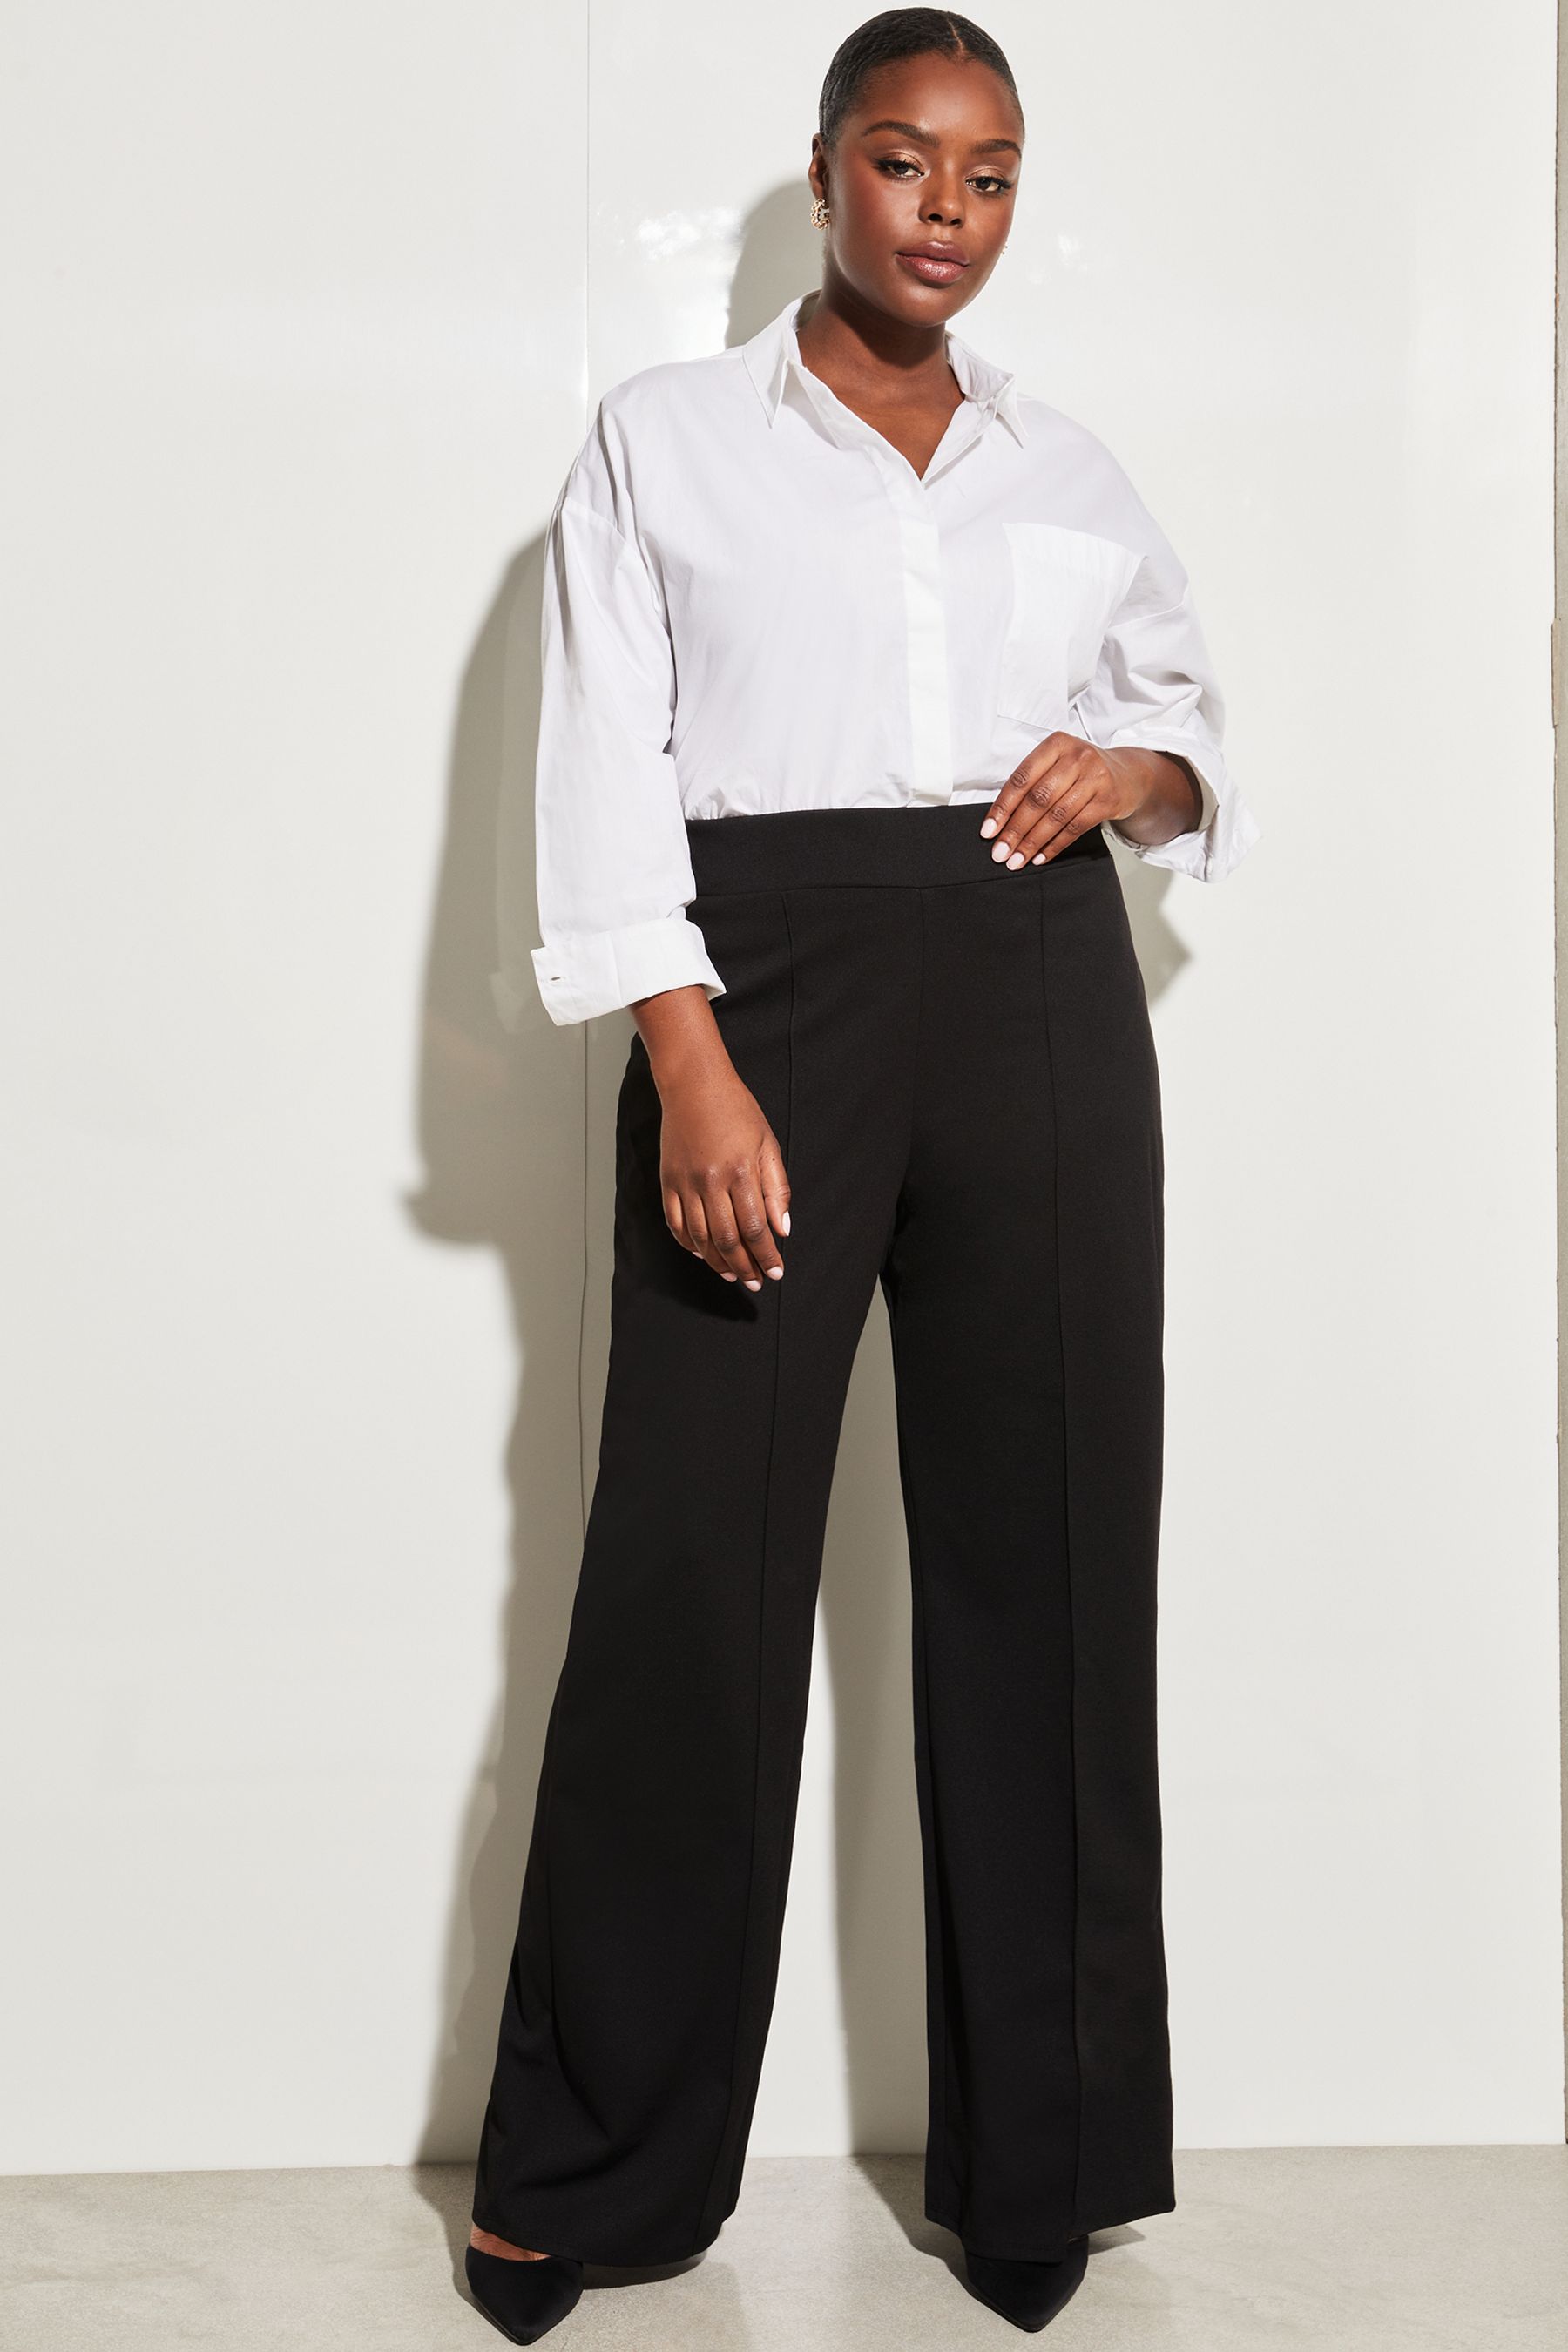 Buy Lipsy High Waist Wide Leg Tailored Trousers from Next Australia